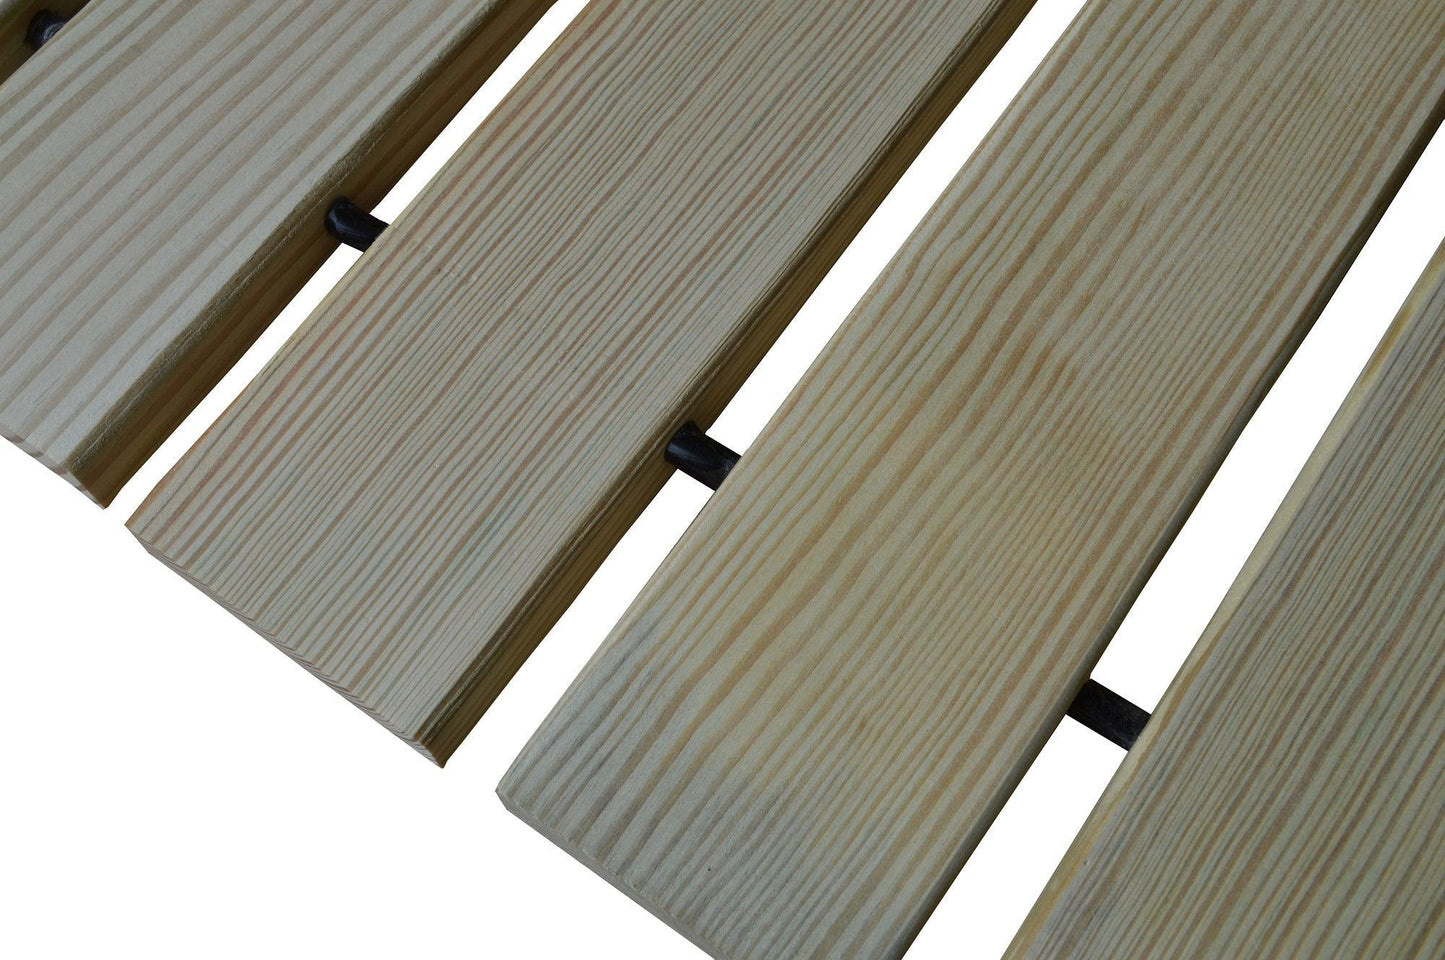 A&L Furniture Co. Pressure Treated Pine  2' x 5' Walkway - LEAD TIME TO SHIP 10 BUSINESS DAYS